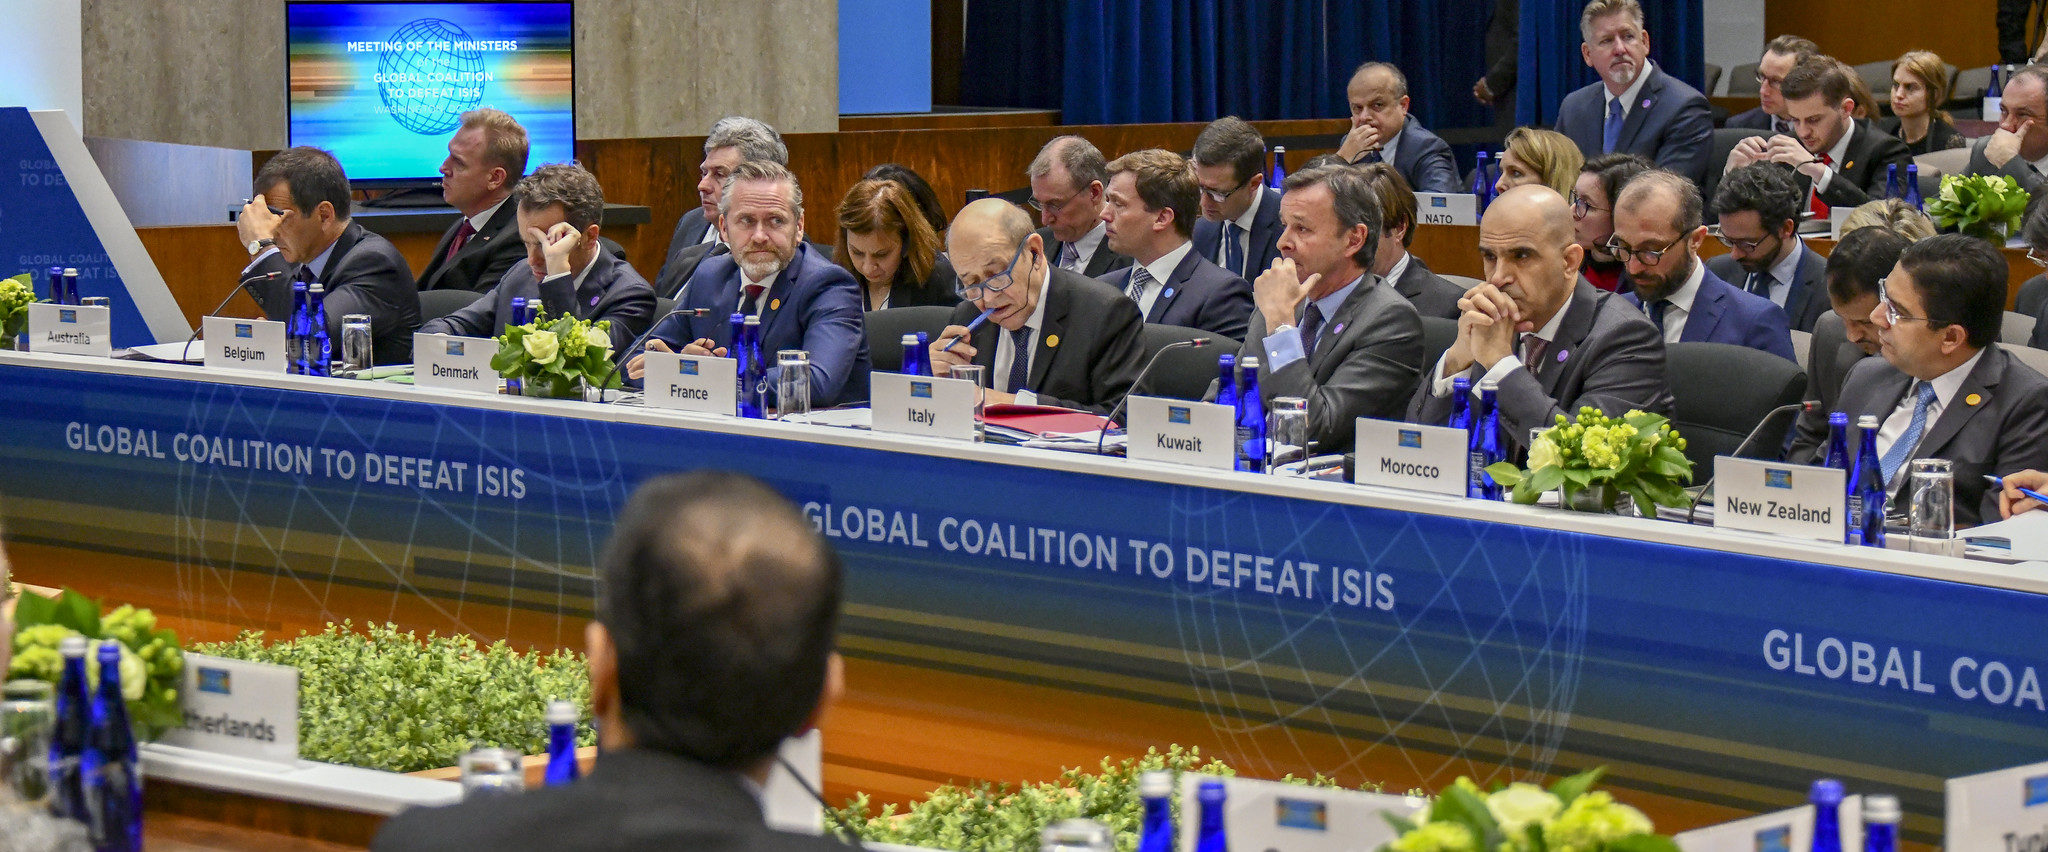 Foreign Ministers Listen on as Secretary Pompeo Delivers Opening Remarks